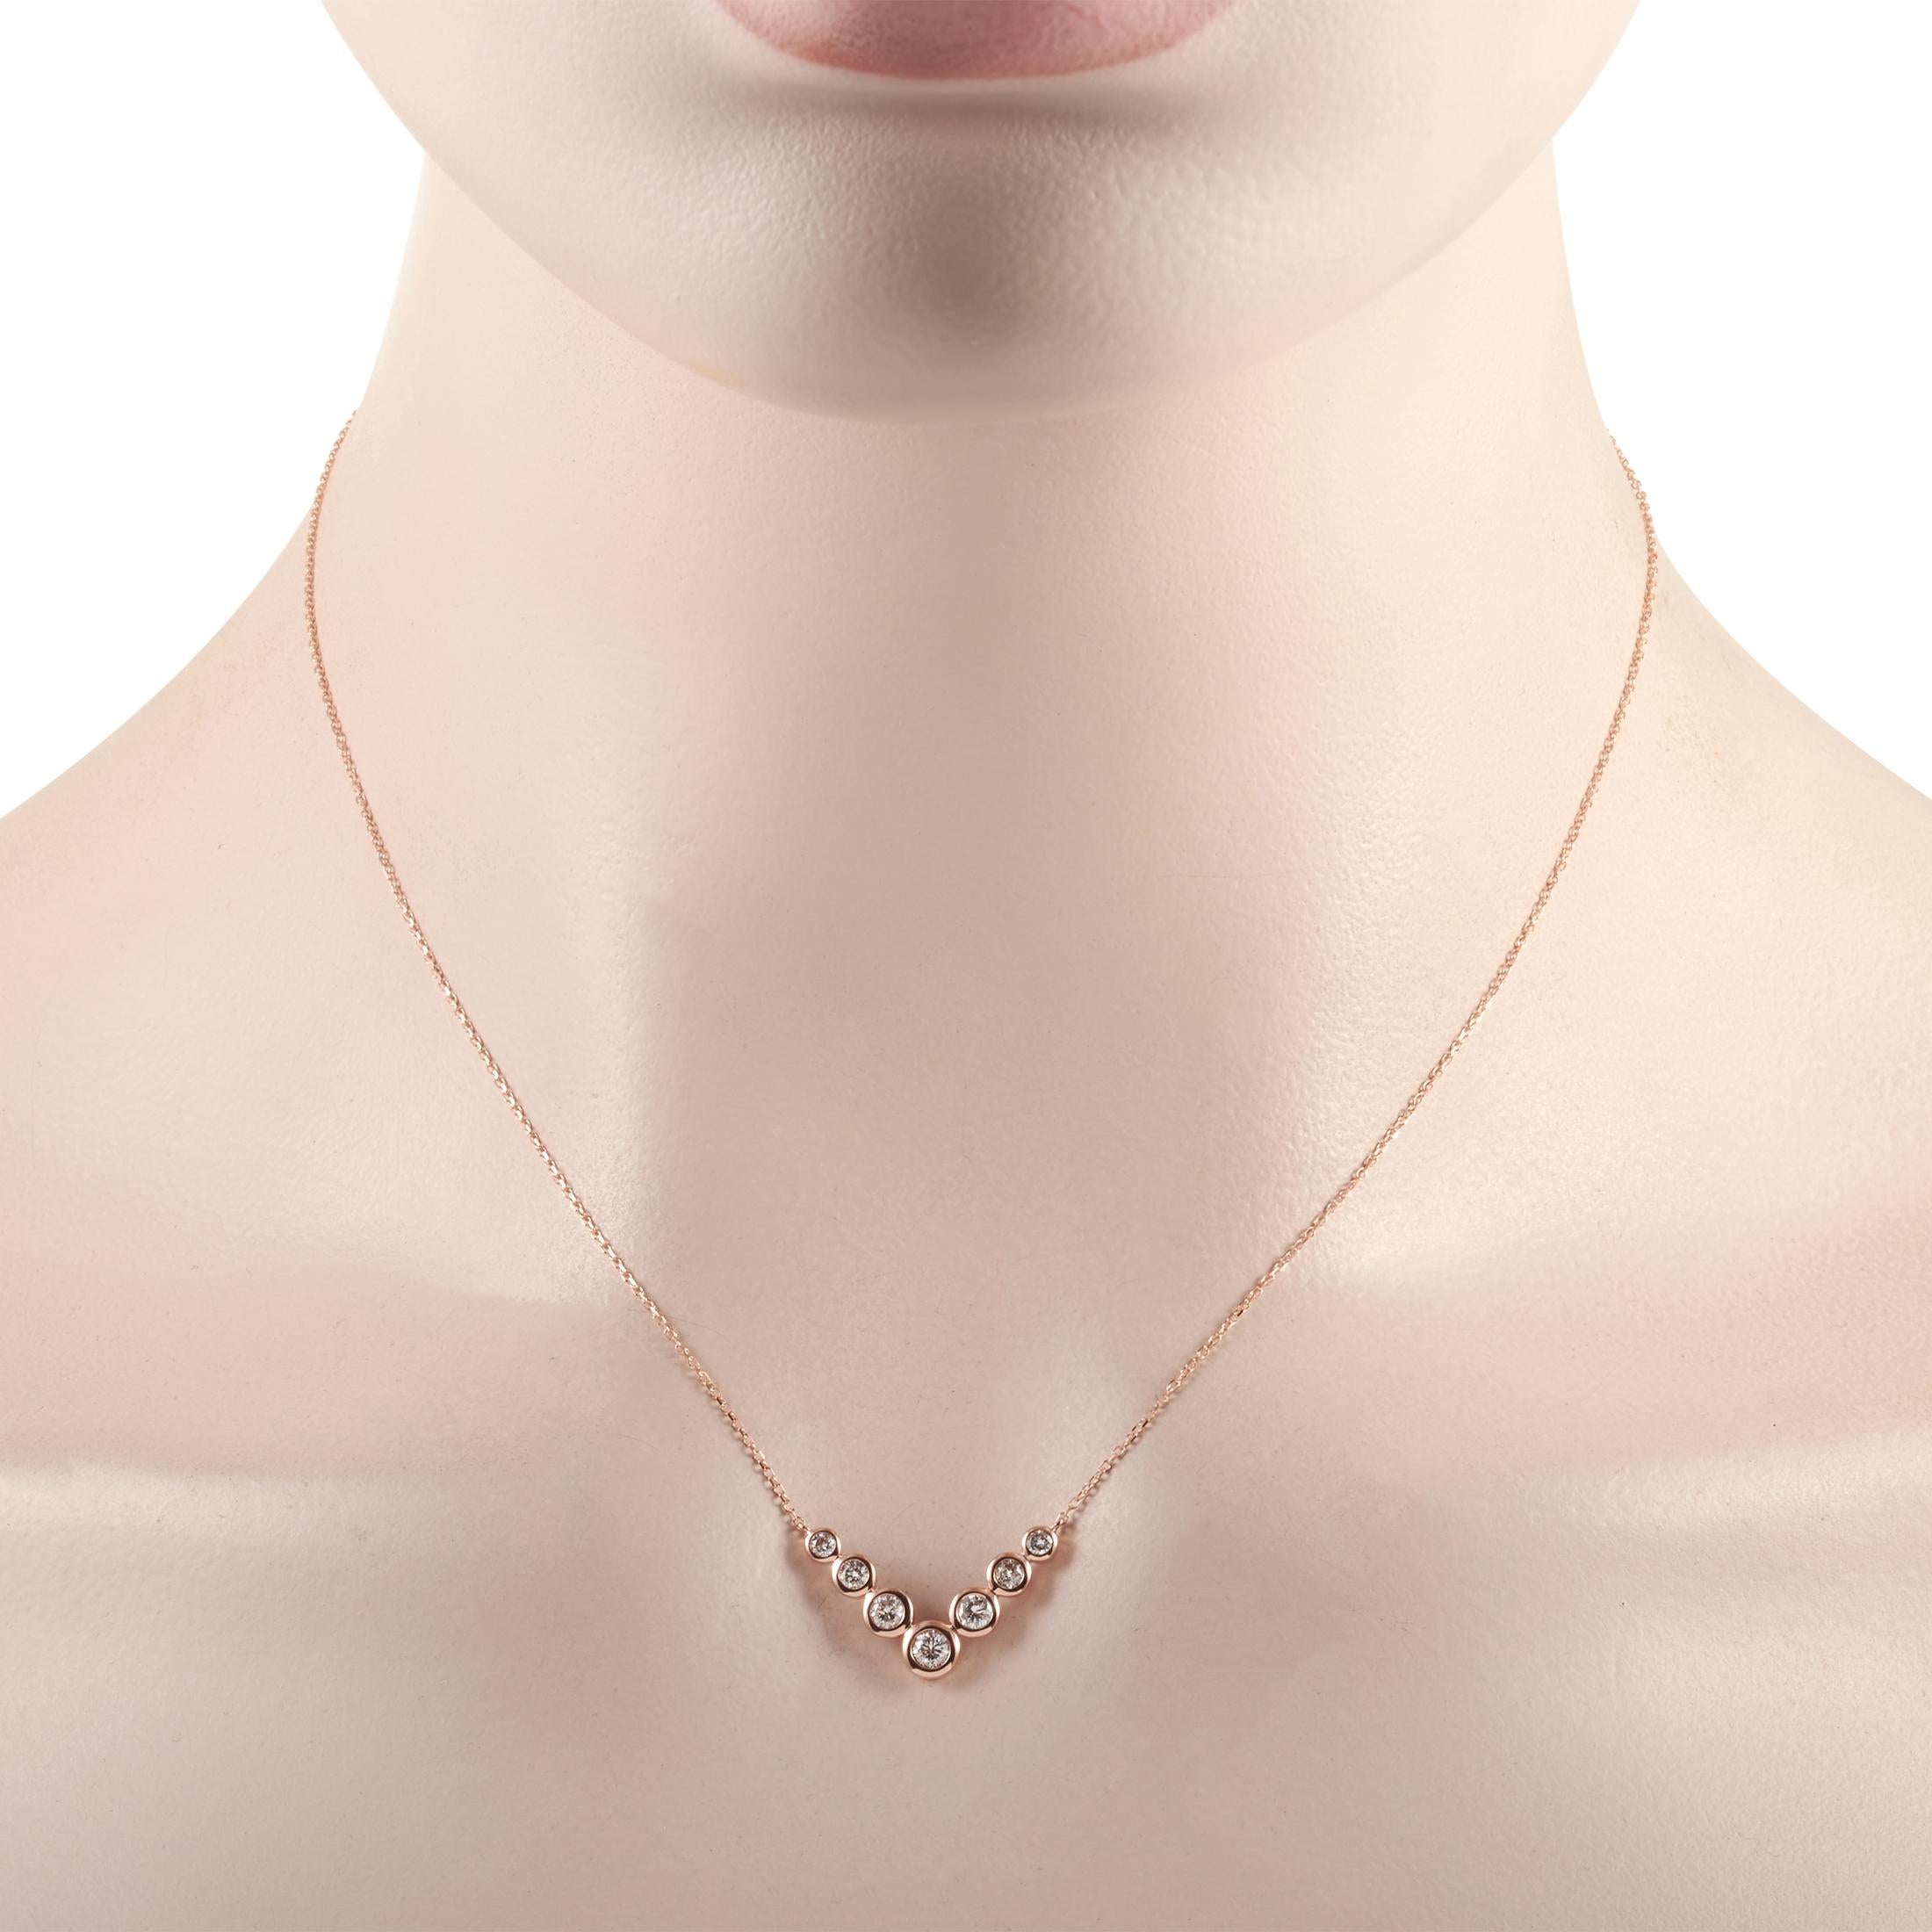 This LB Exclusive necklace is made of 14K rose gold and embellished with diamonds that amount to 0.50 carats. The necklace weighs 2.4 grams and boasts a 15” chain and a pendant that measures 0.50” in length and 0.75” in width.
 
 Offered in brand